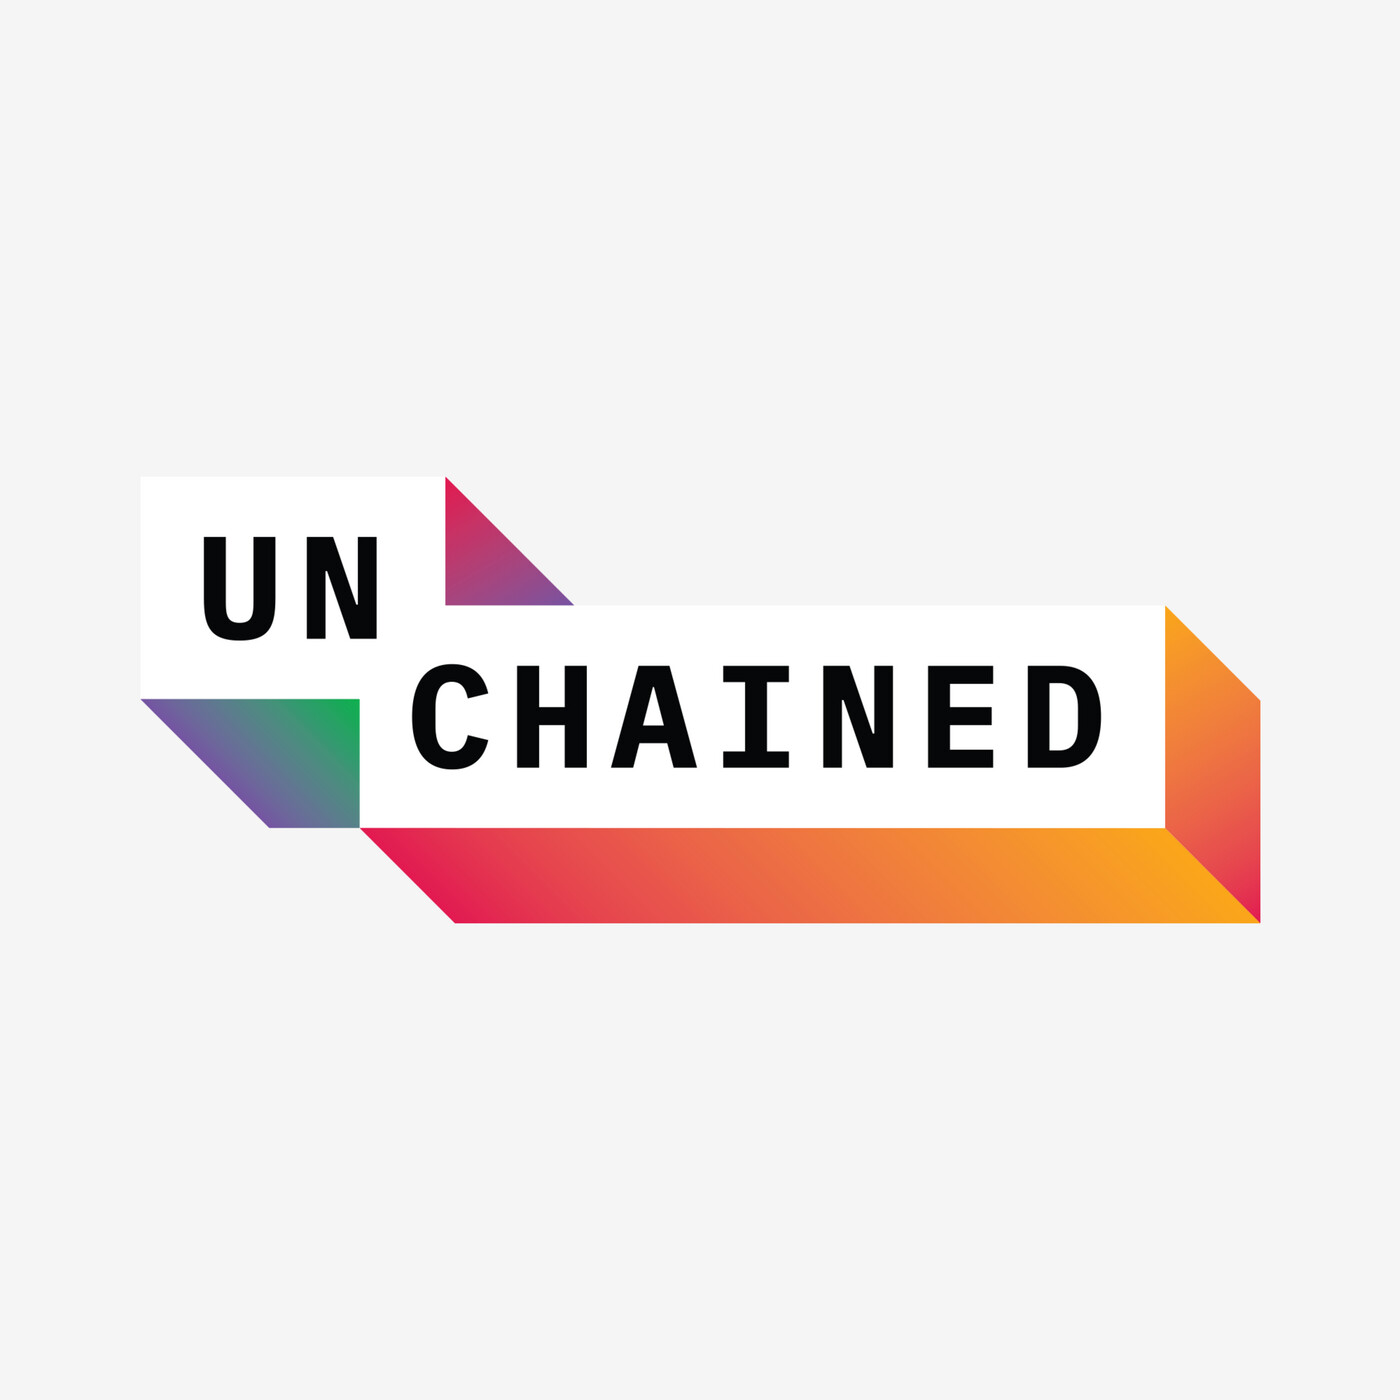 UNCHAINED:  Why All 10,000 OnChainMonkey NFTs Will Move From Ethereum to Bitcoin